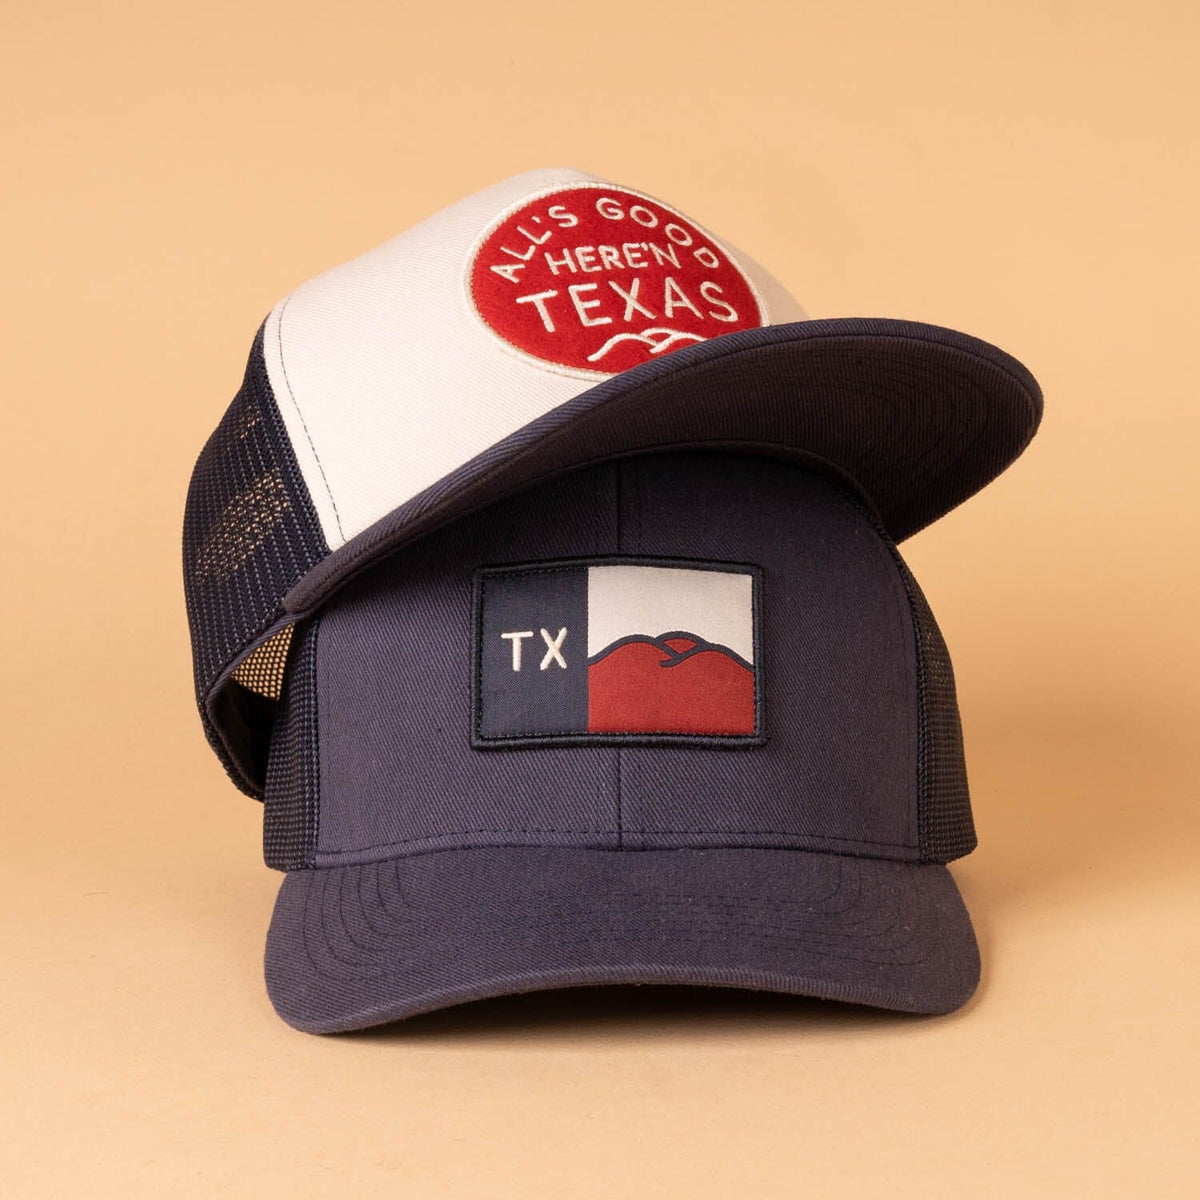 Texas Trucker Hats – Texas Hill Country Provisions